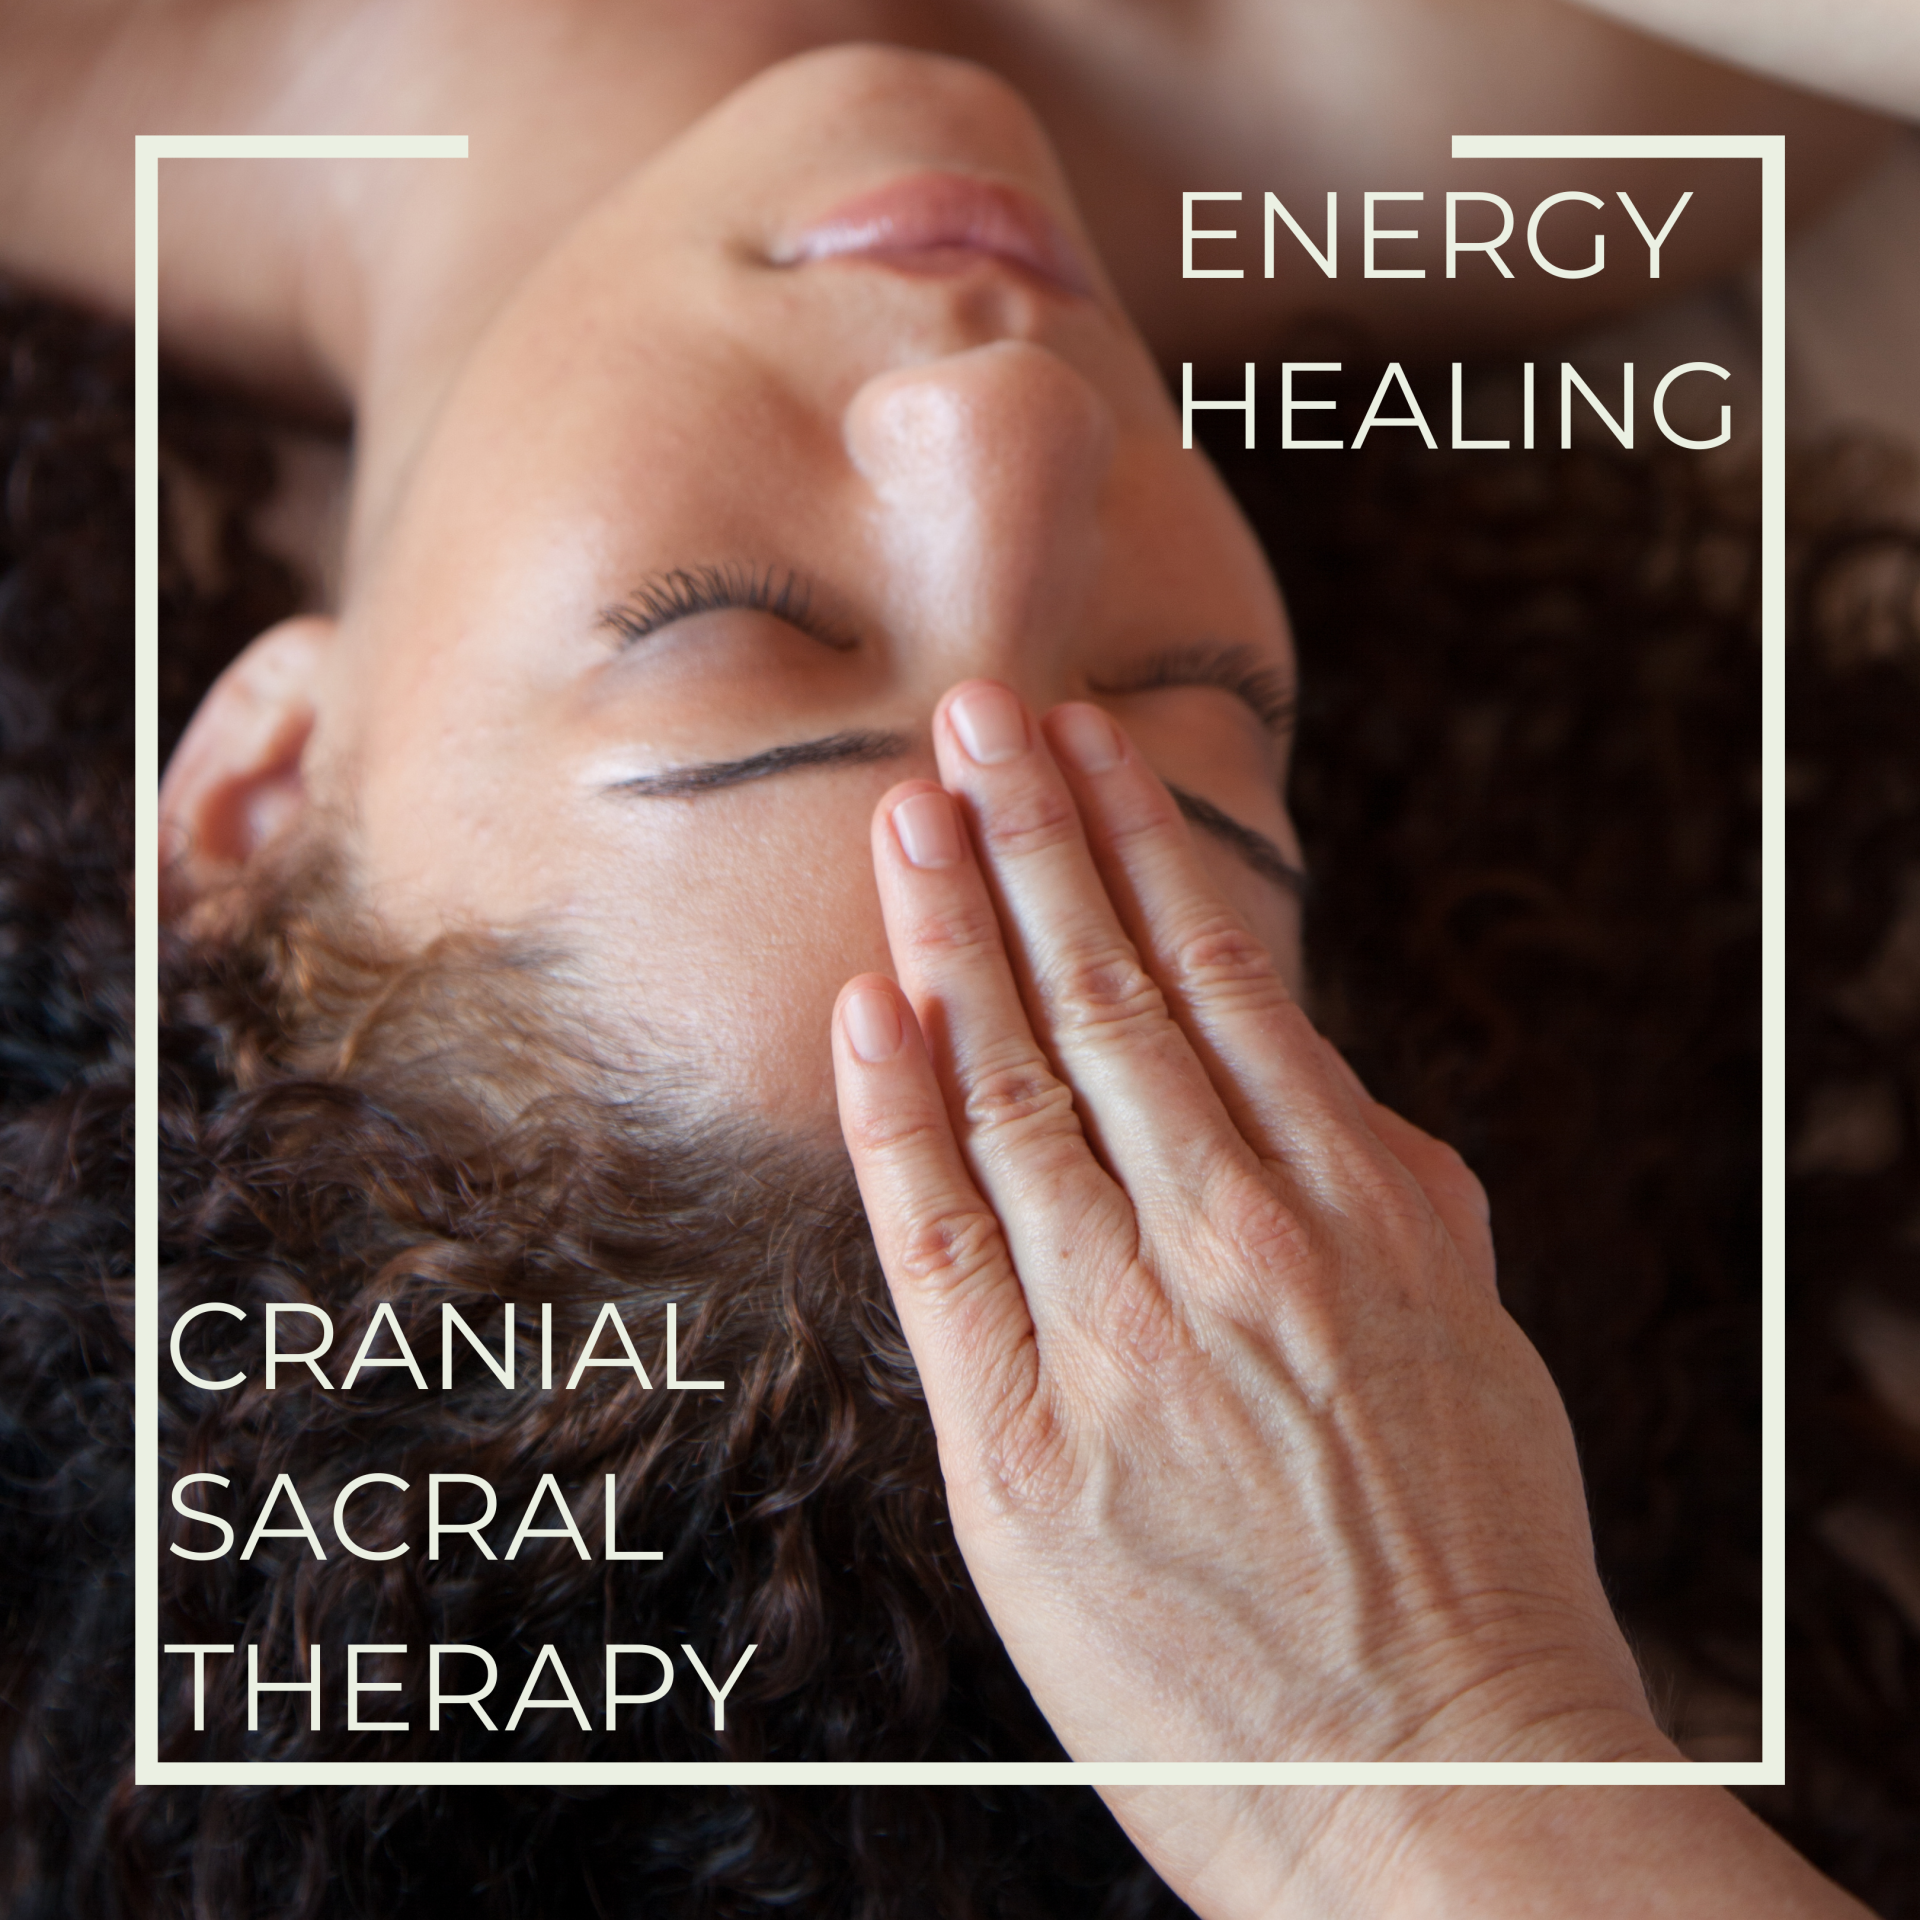 Carnial Sacral Therapy